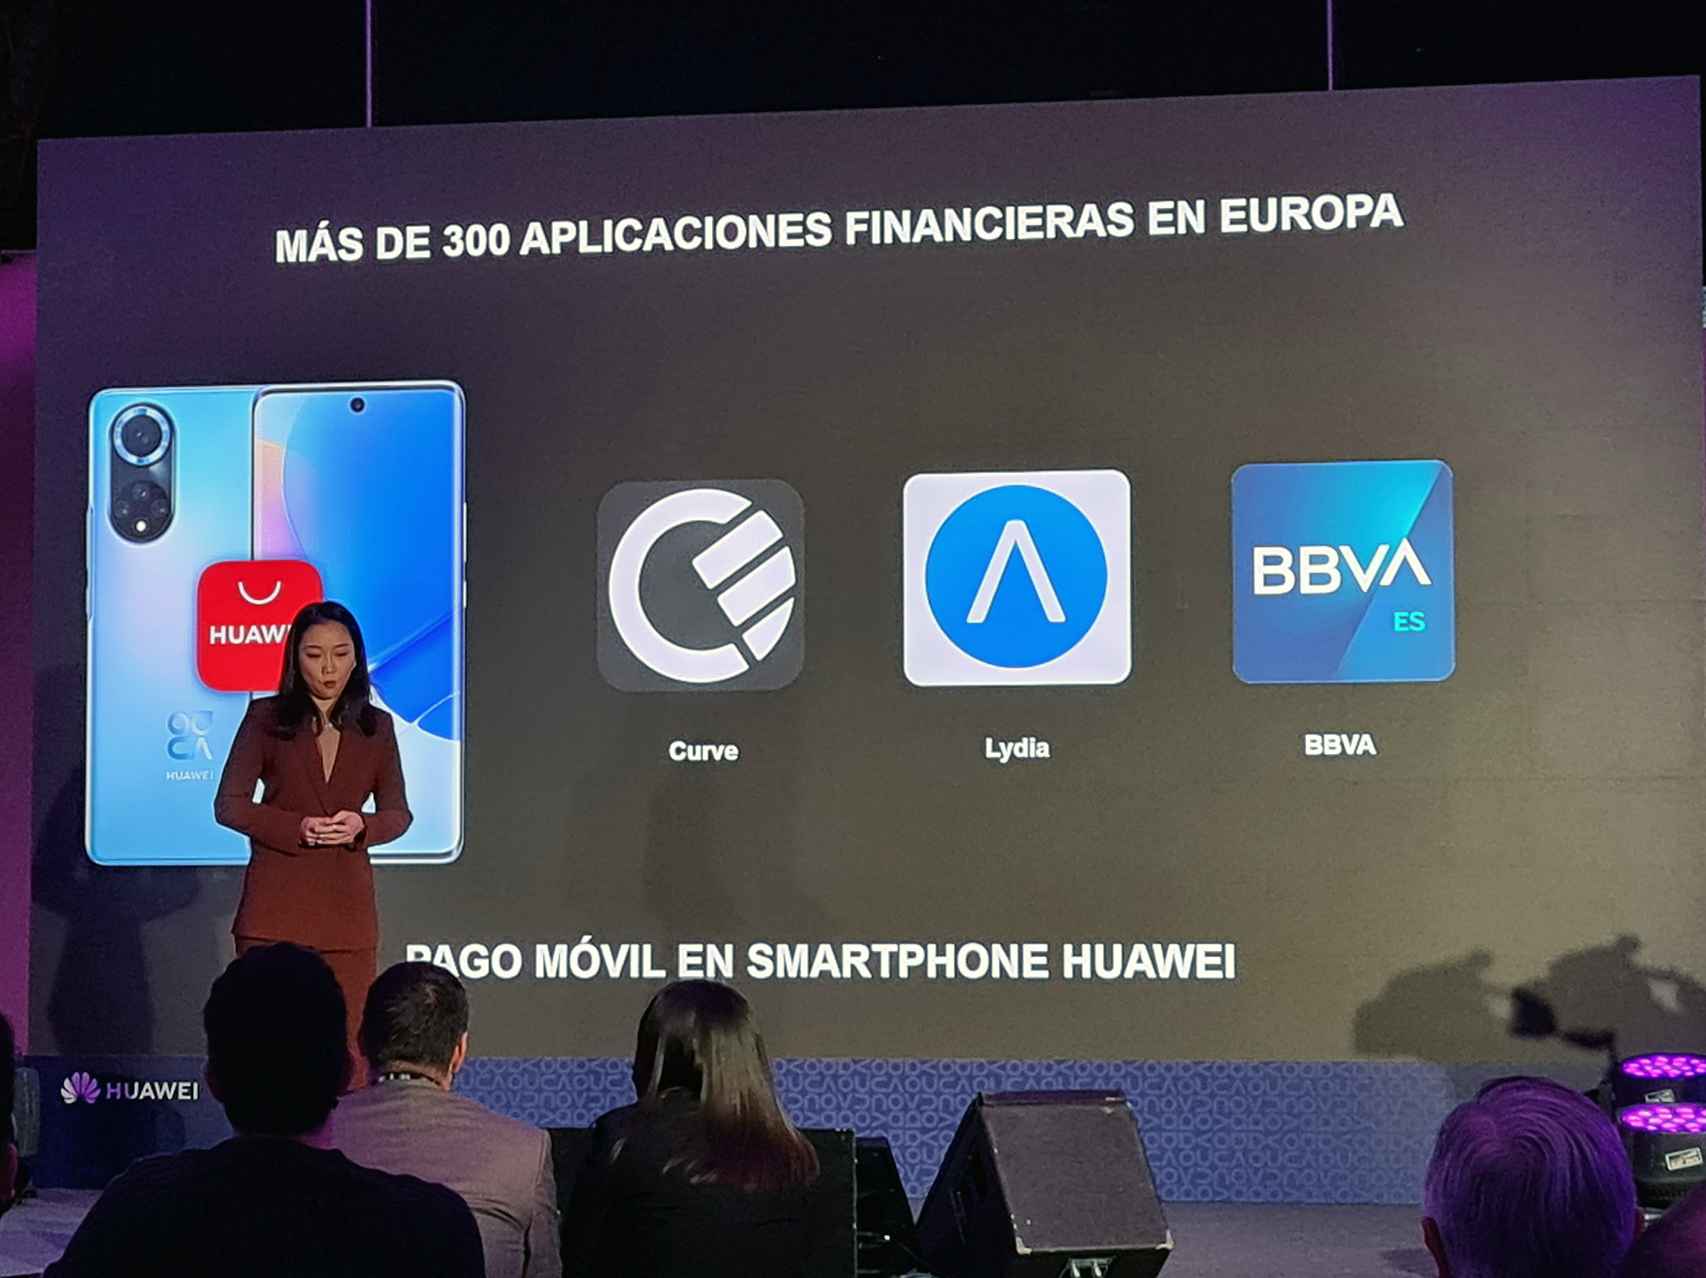 Some of Huawei's banking apps in Europe with HarmonyOS